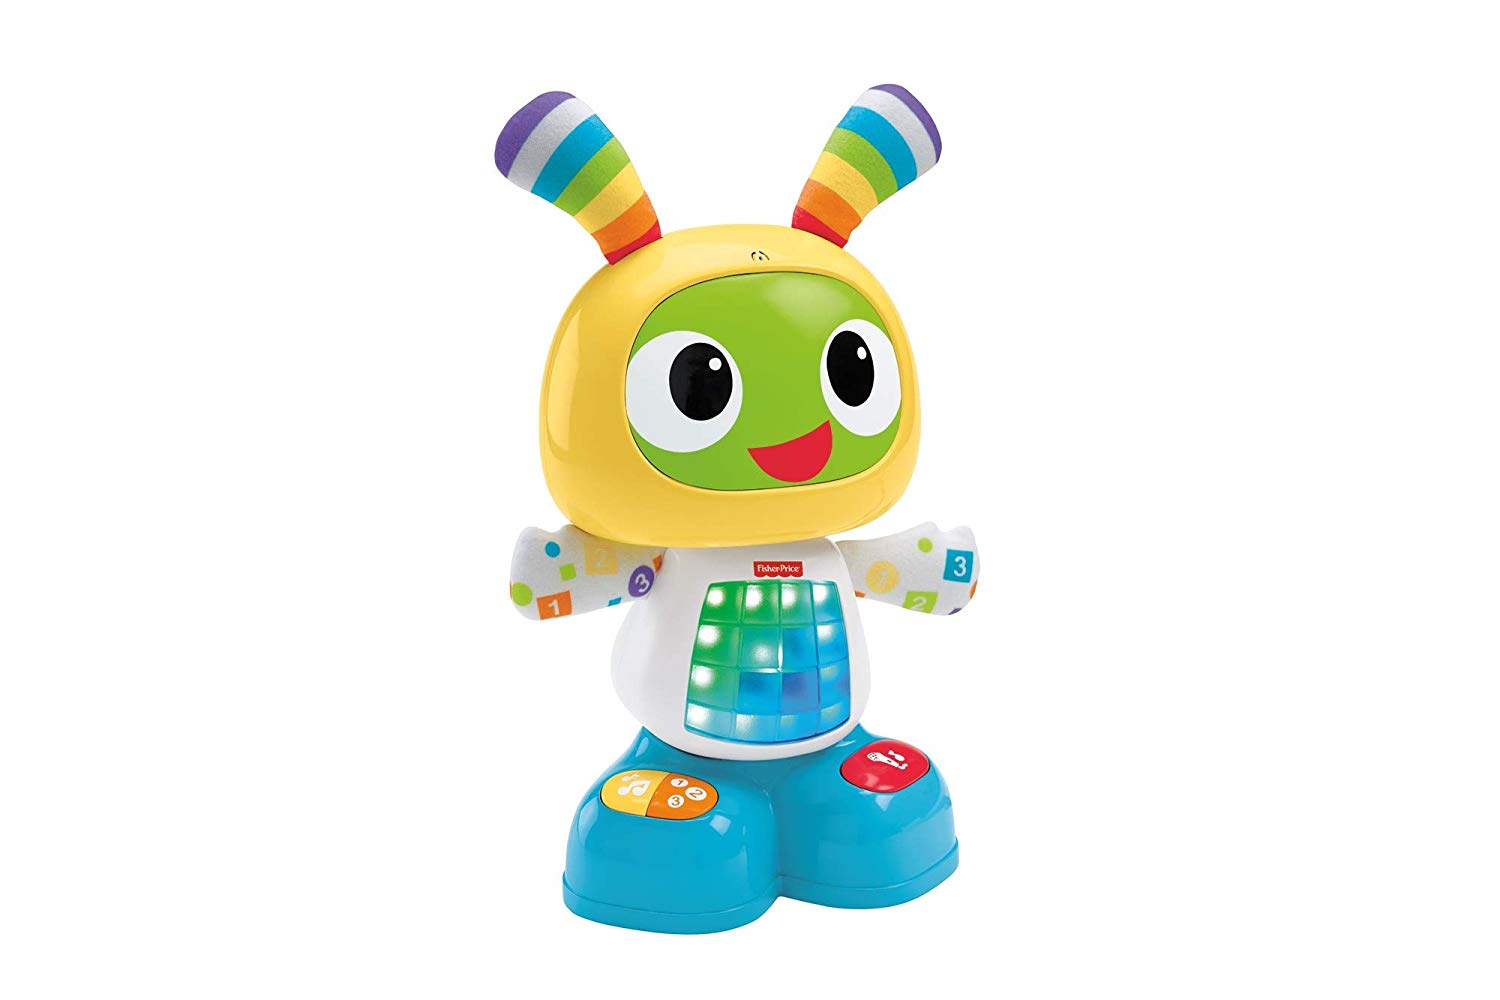 Fisher Price – Learning Robot Design, Baby, Toy Education, Portuguese Versi